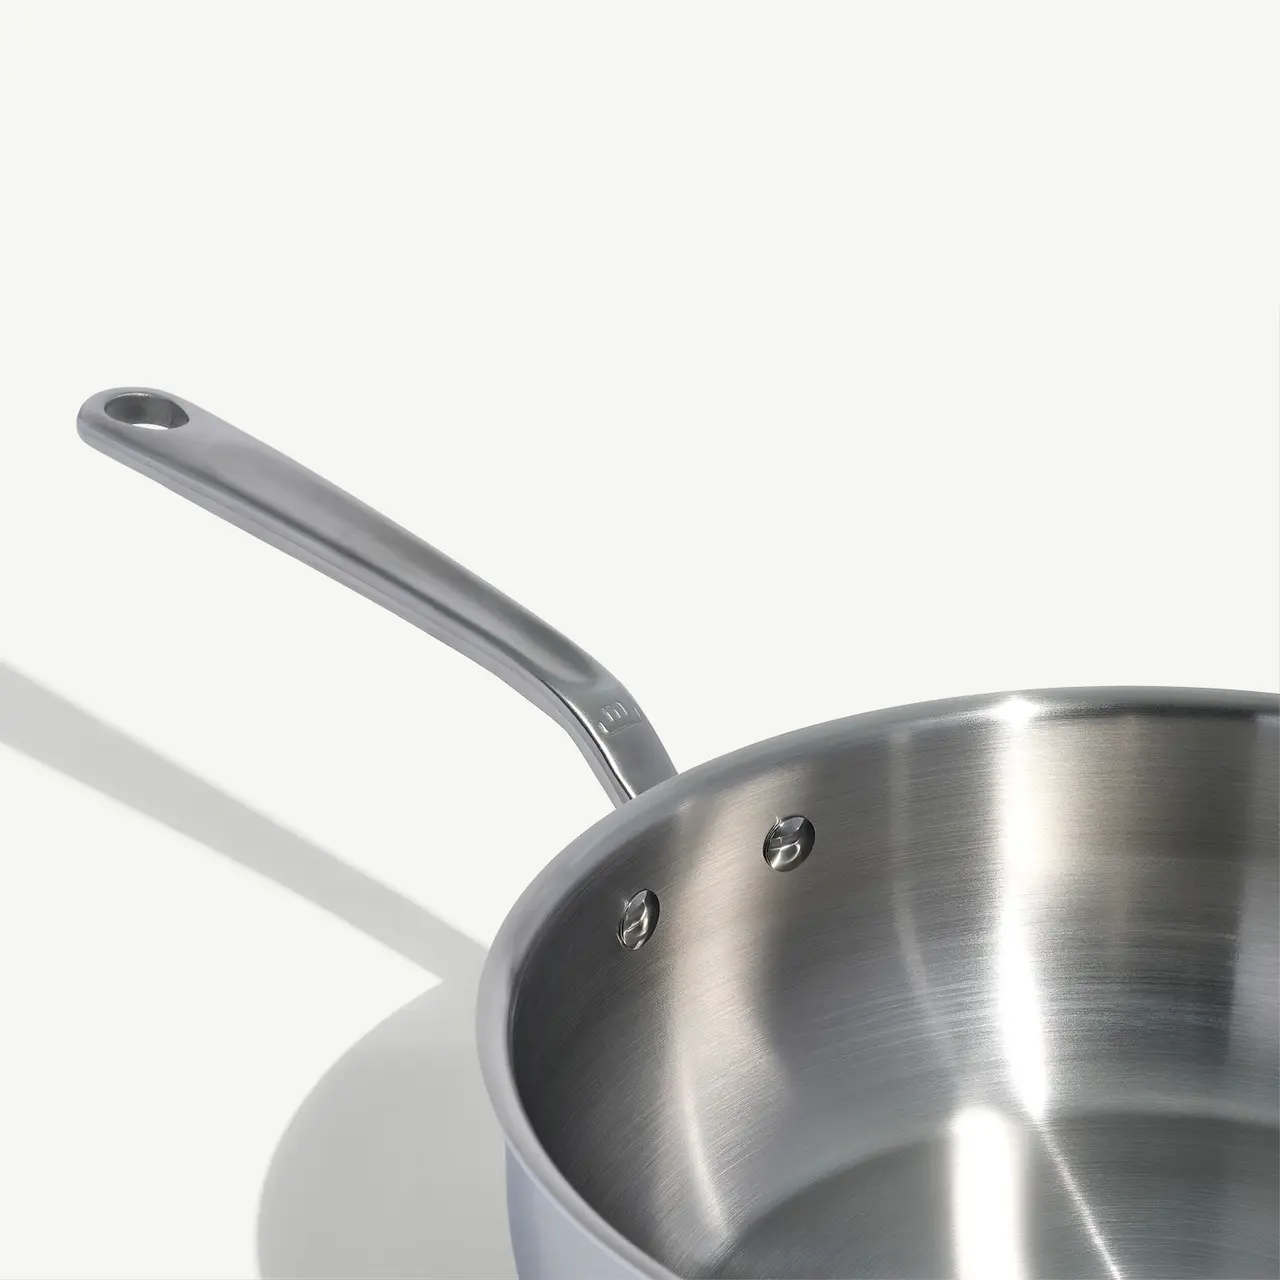 A stainless steel saucepan with a long handle casts a shadow on a light background.